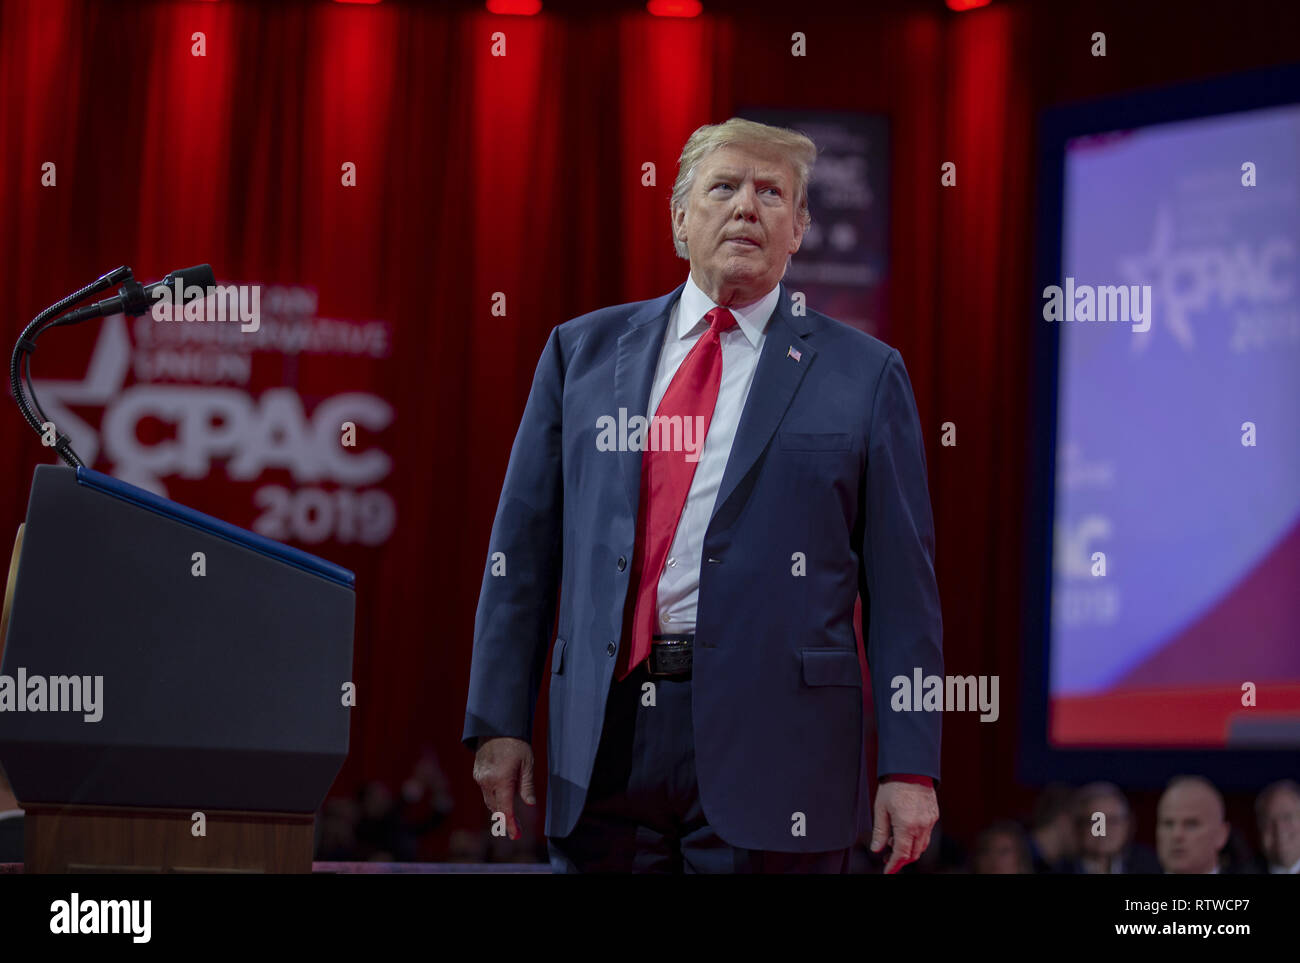 Washington, DC. 02nd Mar, 2019. U.S. President Donald Trump during CPAC 2019 on March 02, 2019 in Washington, DC. The American Conservative Union hosts the annual Conservative Political Action Conference to discuss conservative agenda. Credit: Tasos Katopodis/Pool via CNP | usage worldwide Credit: dpa/Alamy Live News Stock Photo